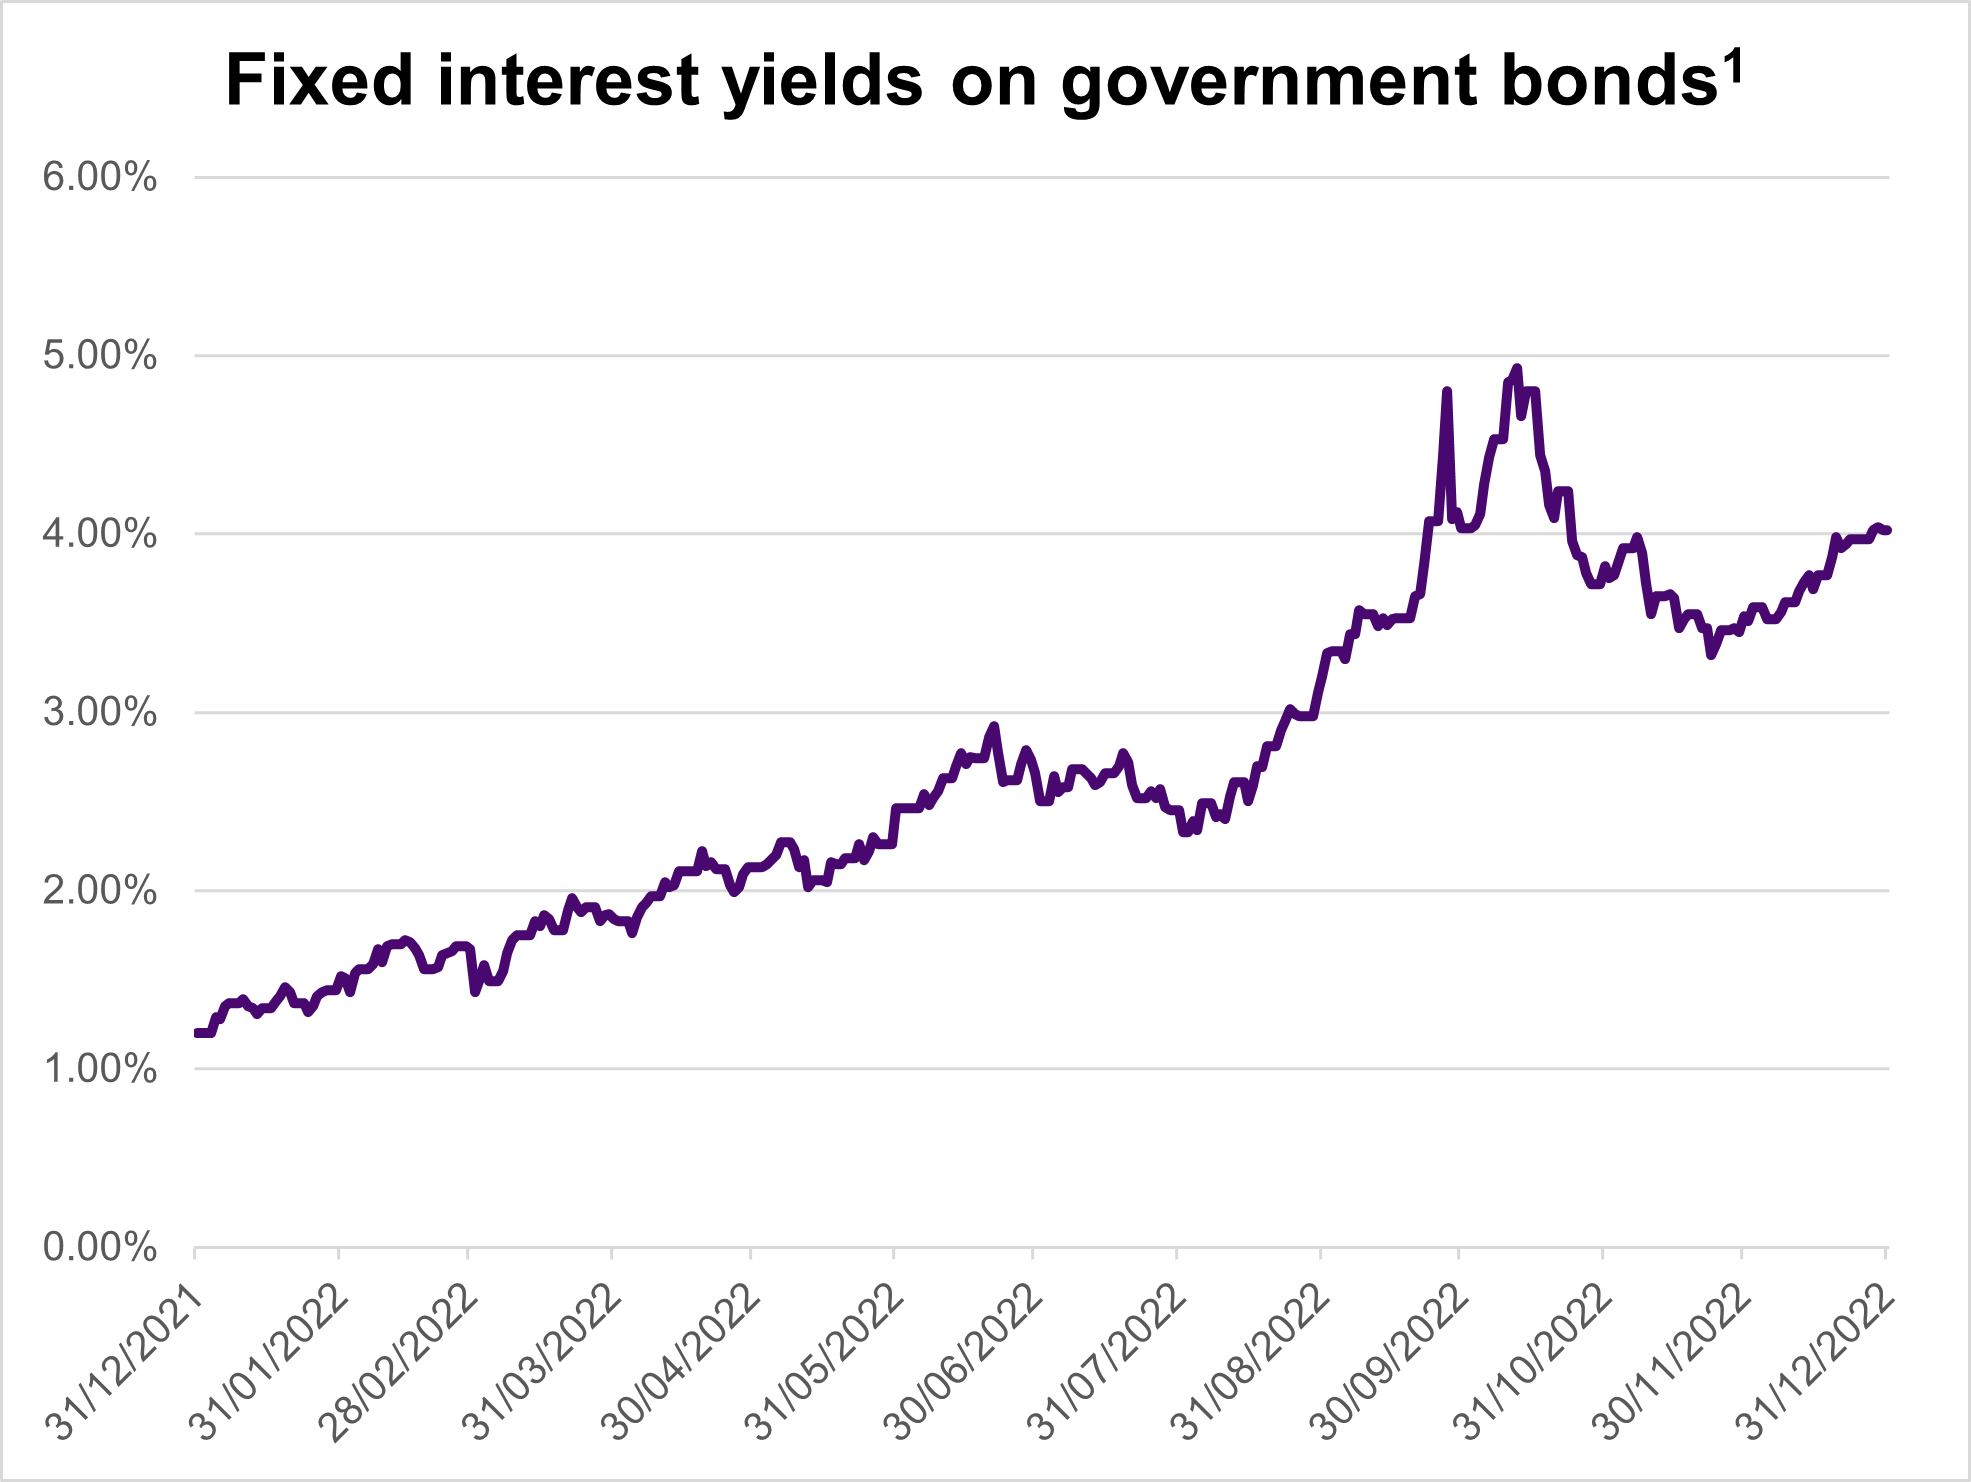 Fixed interest yields on government bonds